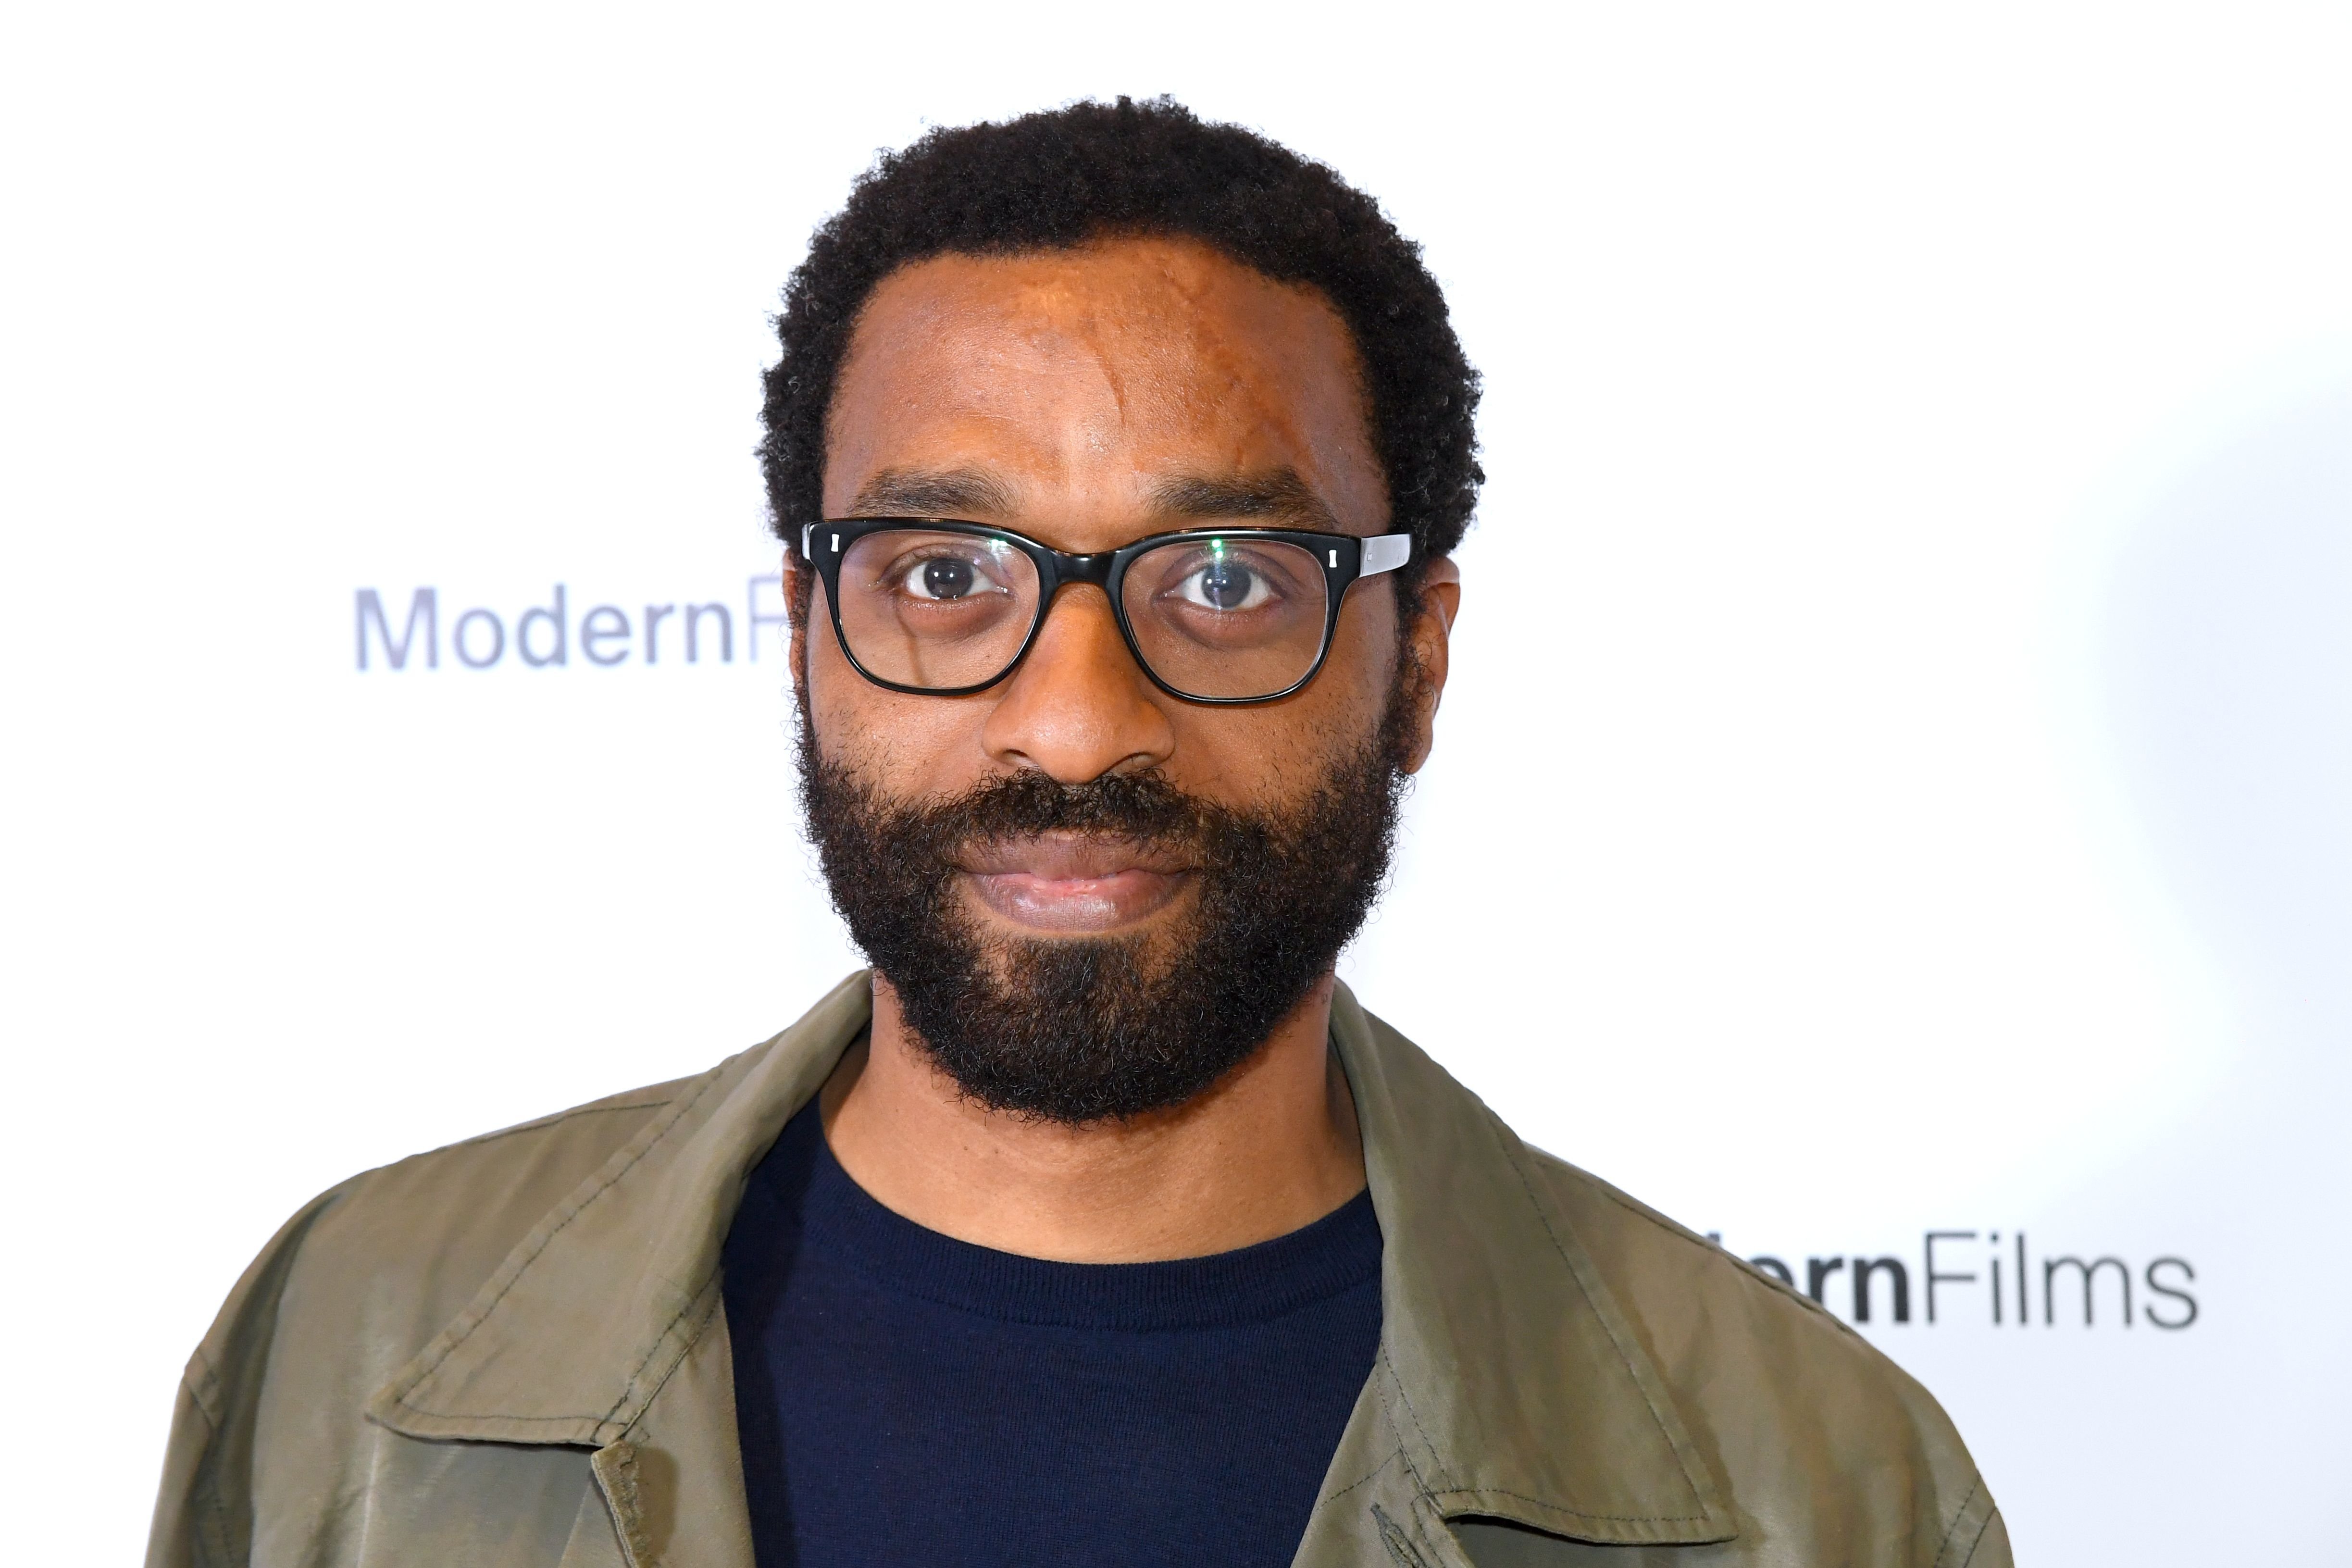 Chiwetel Ejiofor attends the "Yuli – The Carlos Acosta Story" screening reception at The Royal Opera House on April 03, 2019 in London, England. | Photo: Getty UImages